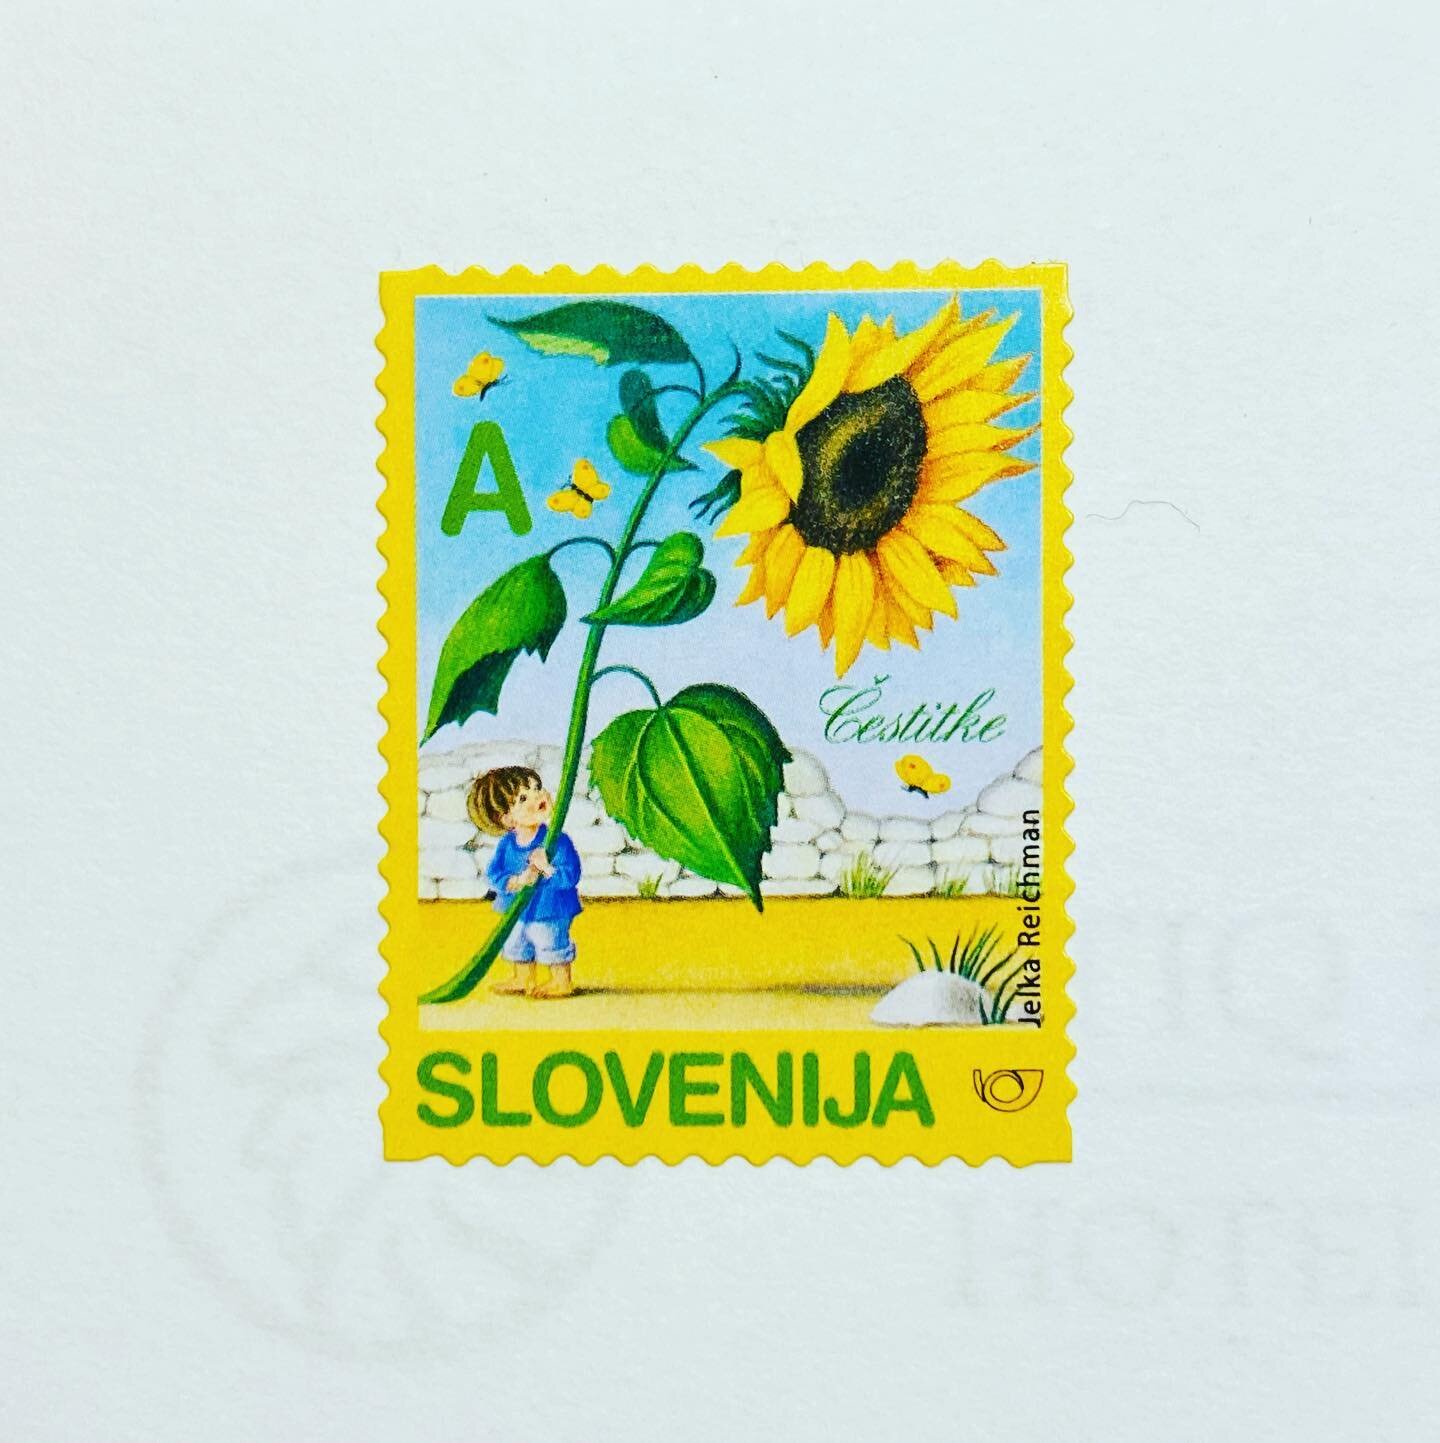 Sketchy Wednesday&rsquo;s 
.
Happy Spring on this beautiful day.
In addition to sketching the journals we&rsquo;re a repository for all the ephemera I collected. 
Here is a stamp from #slovenia known as #thesunnysideofthealps 
.
KBL
.

#coffee #espre